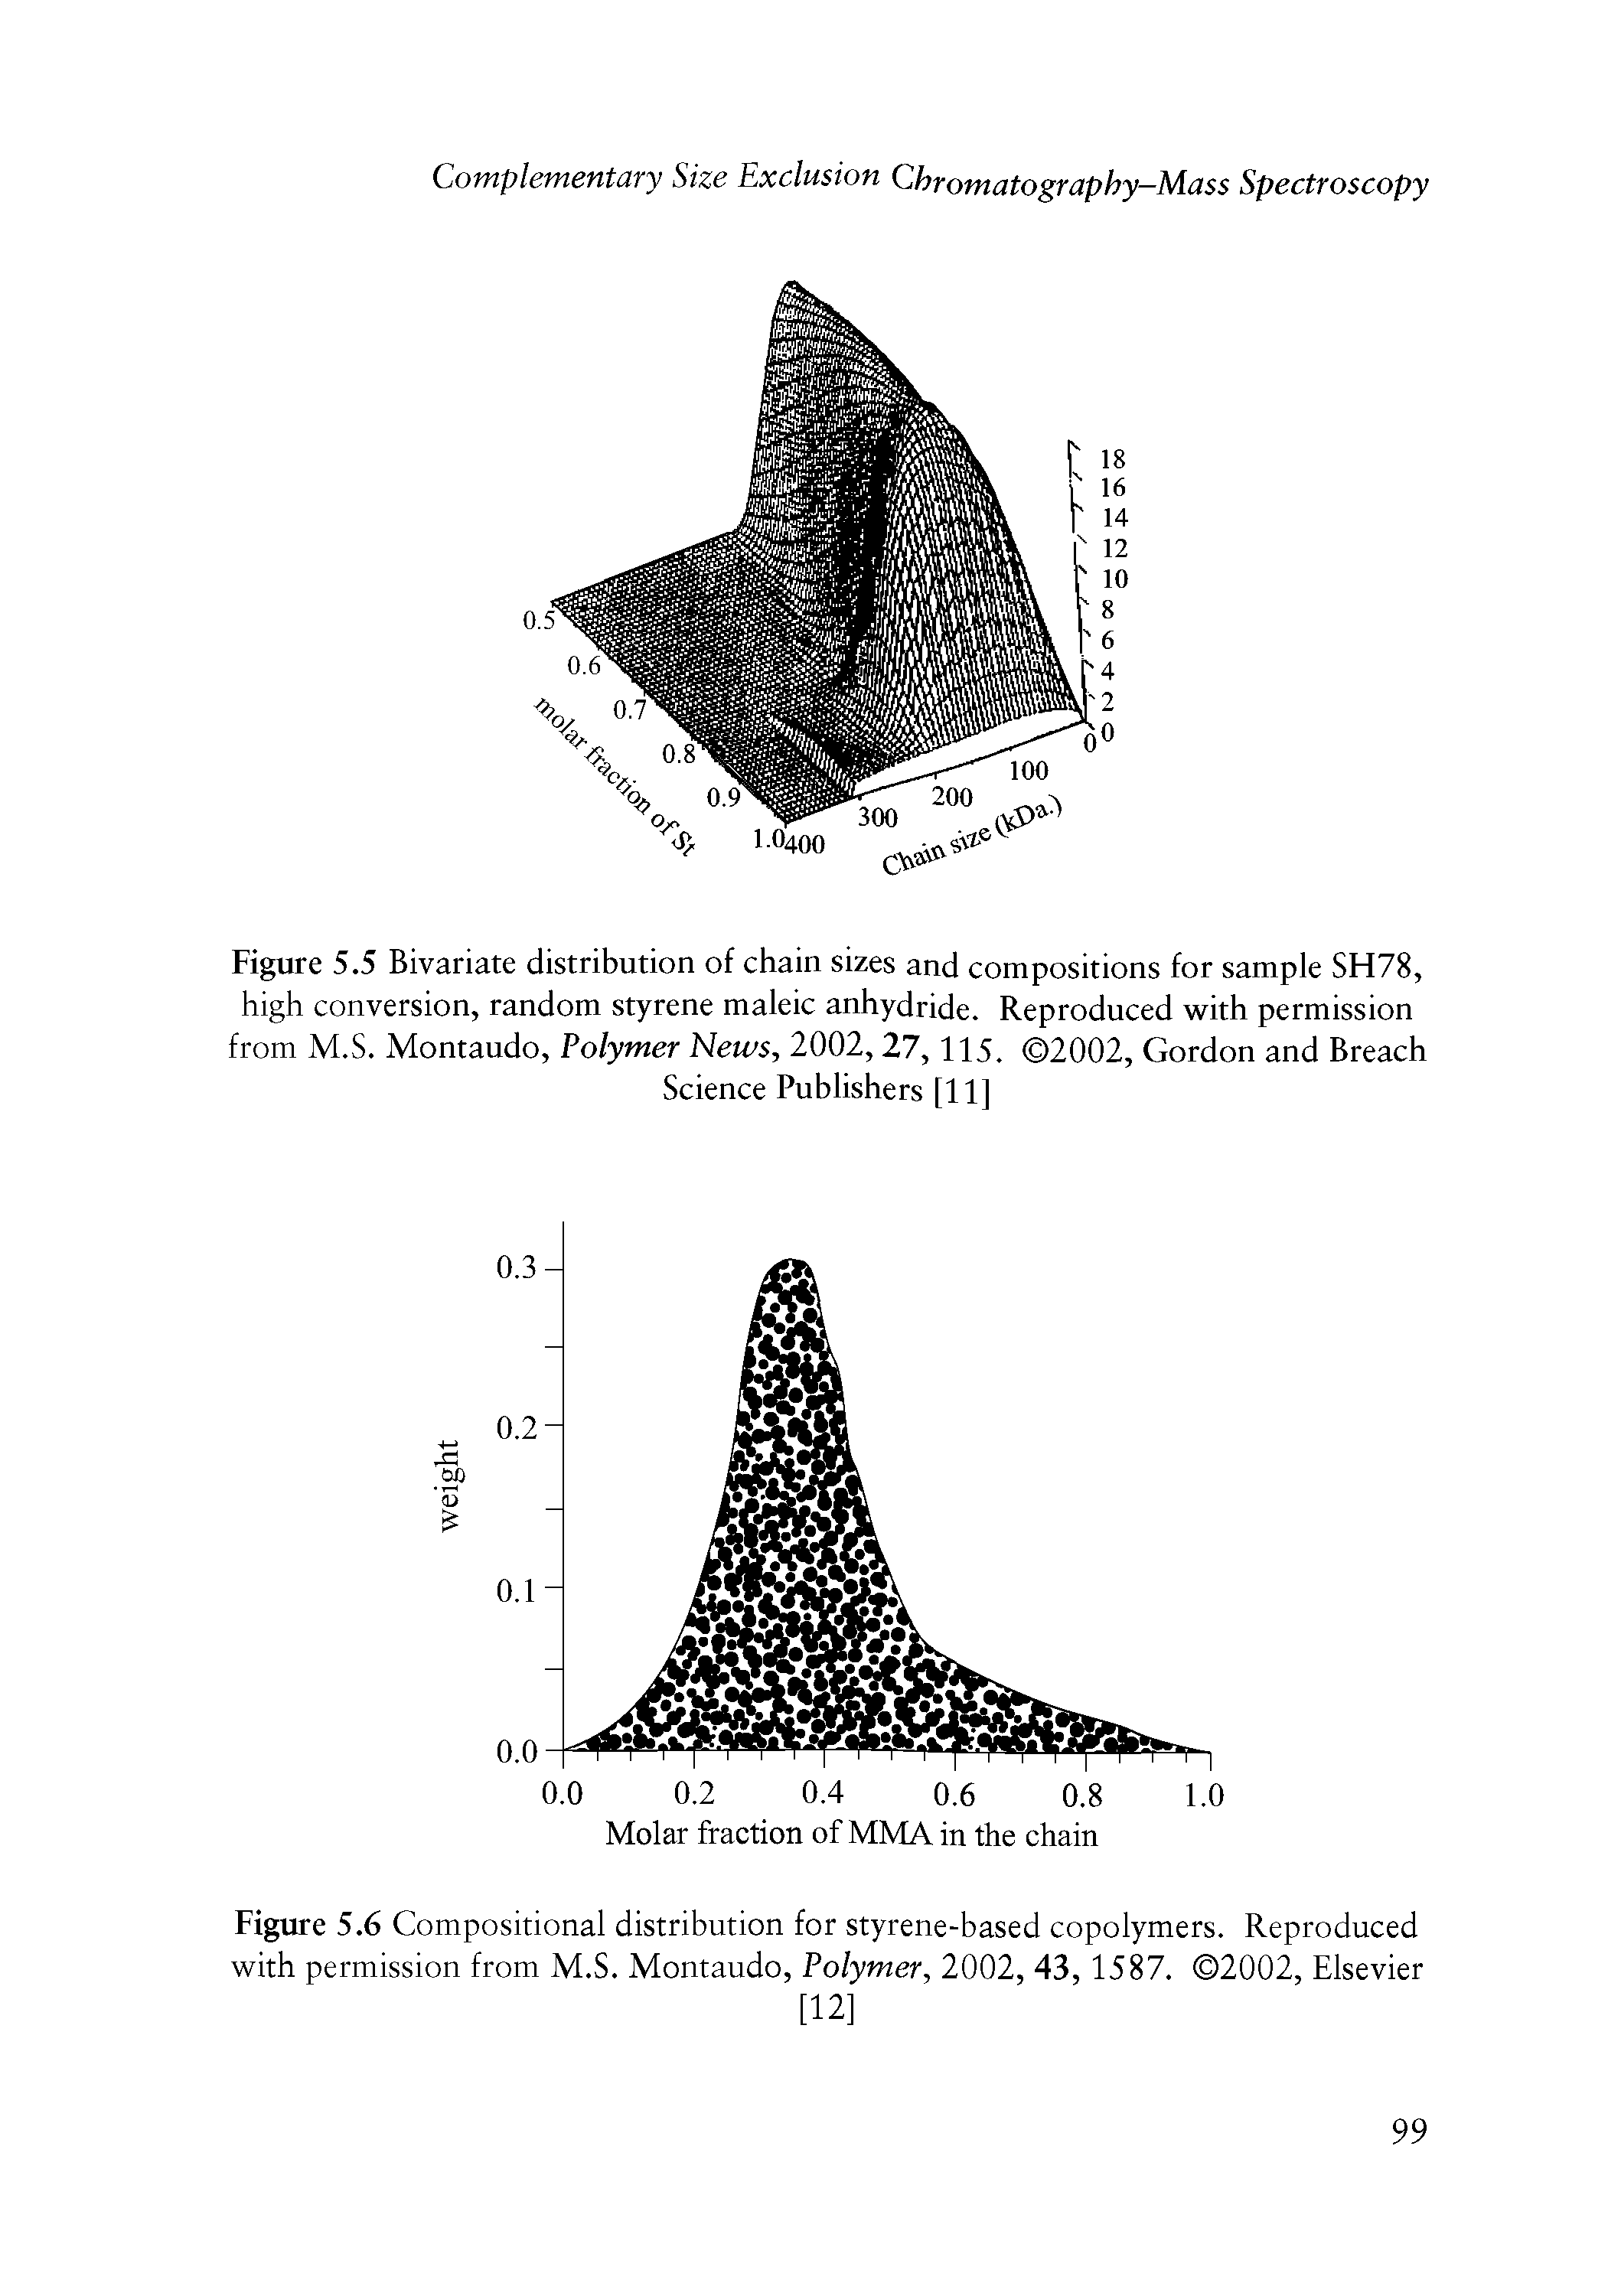 Figure 5.5 Bivariate distribution of chain sizes and compositions for sample SH78, high conversion, random styrene maleic anhydride. Reproduced with permission from M.S. Montaudo, Polymer News, 2002,27,115. 2002, Gordon and Breach...